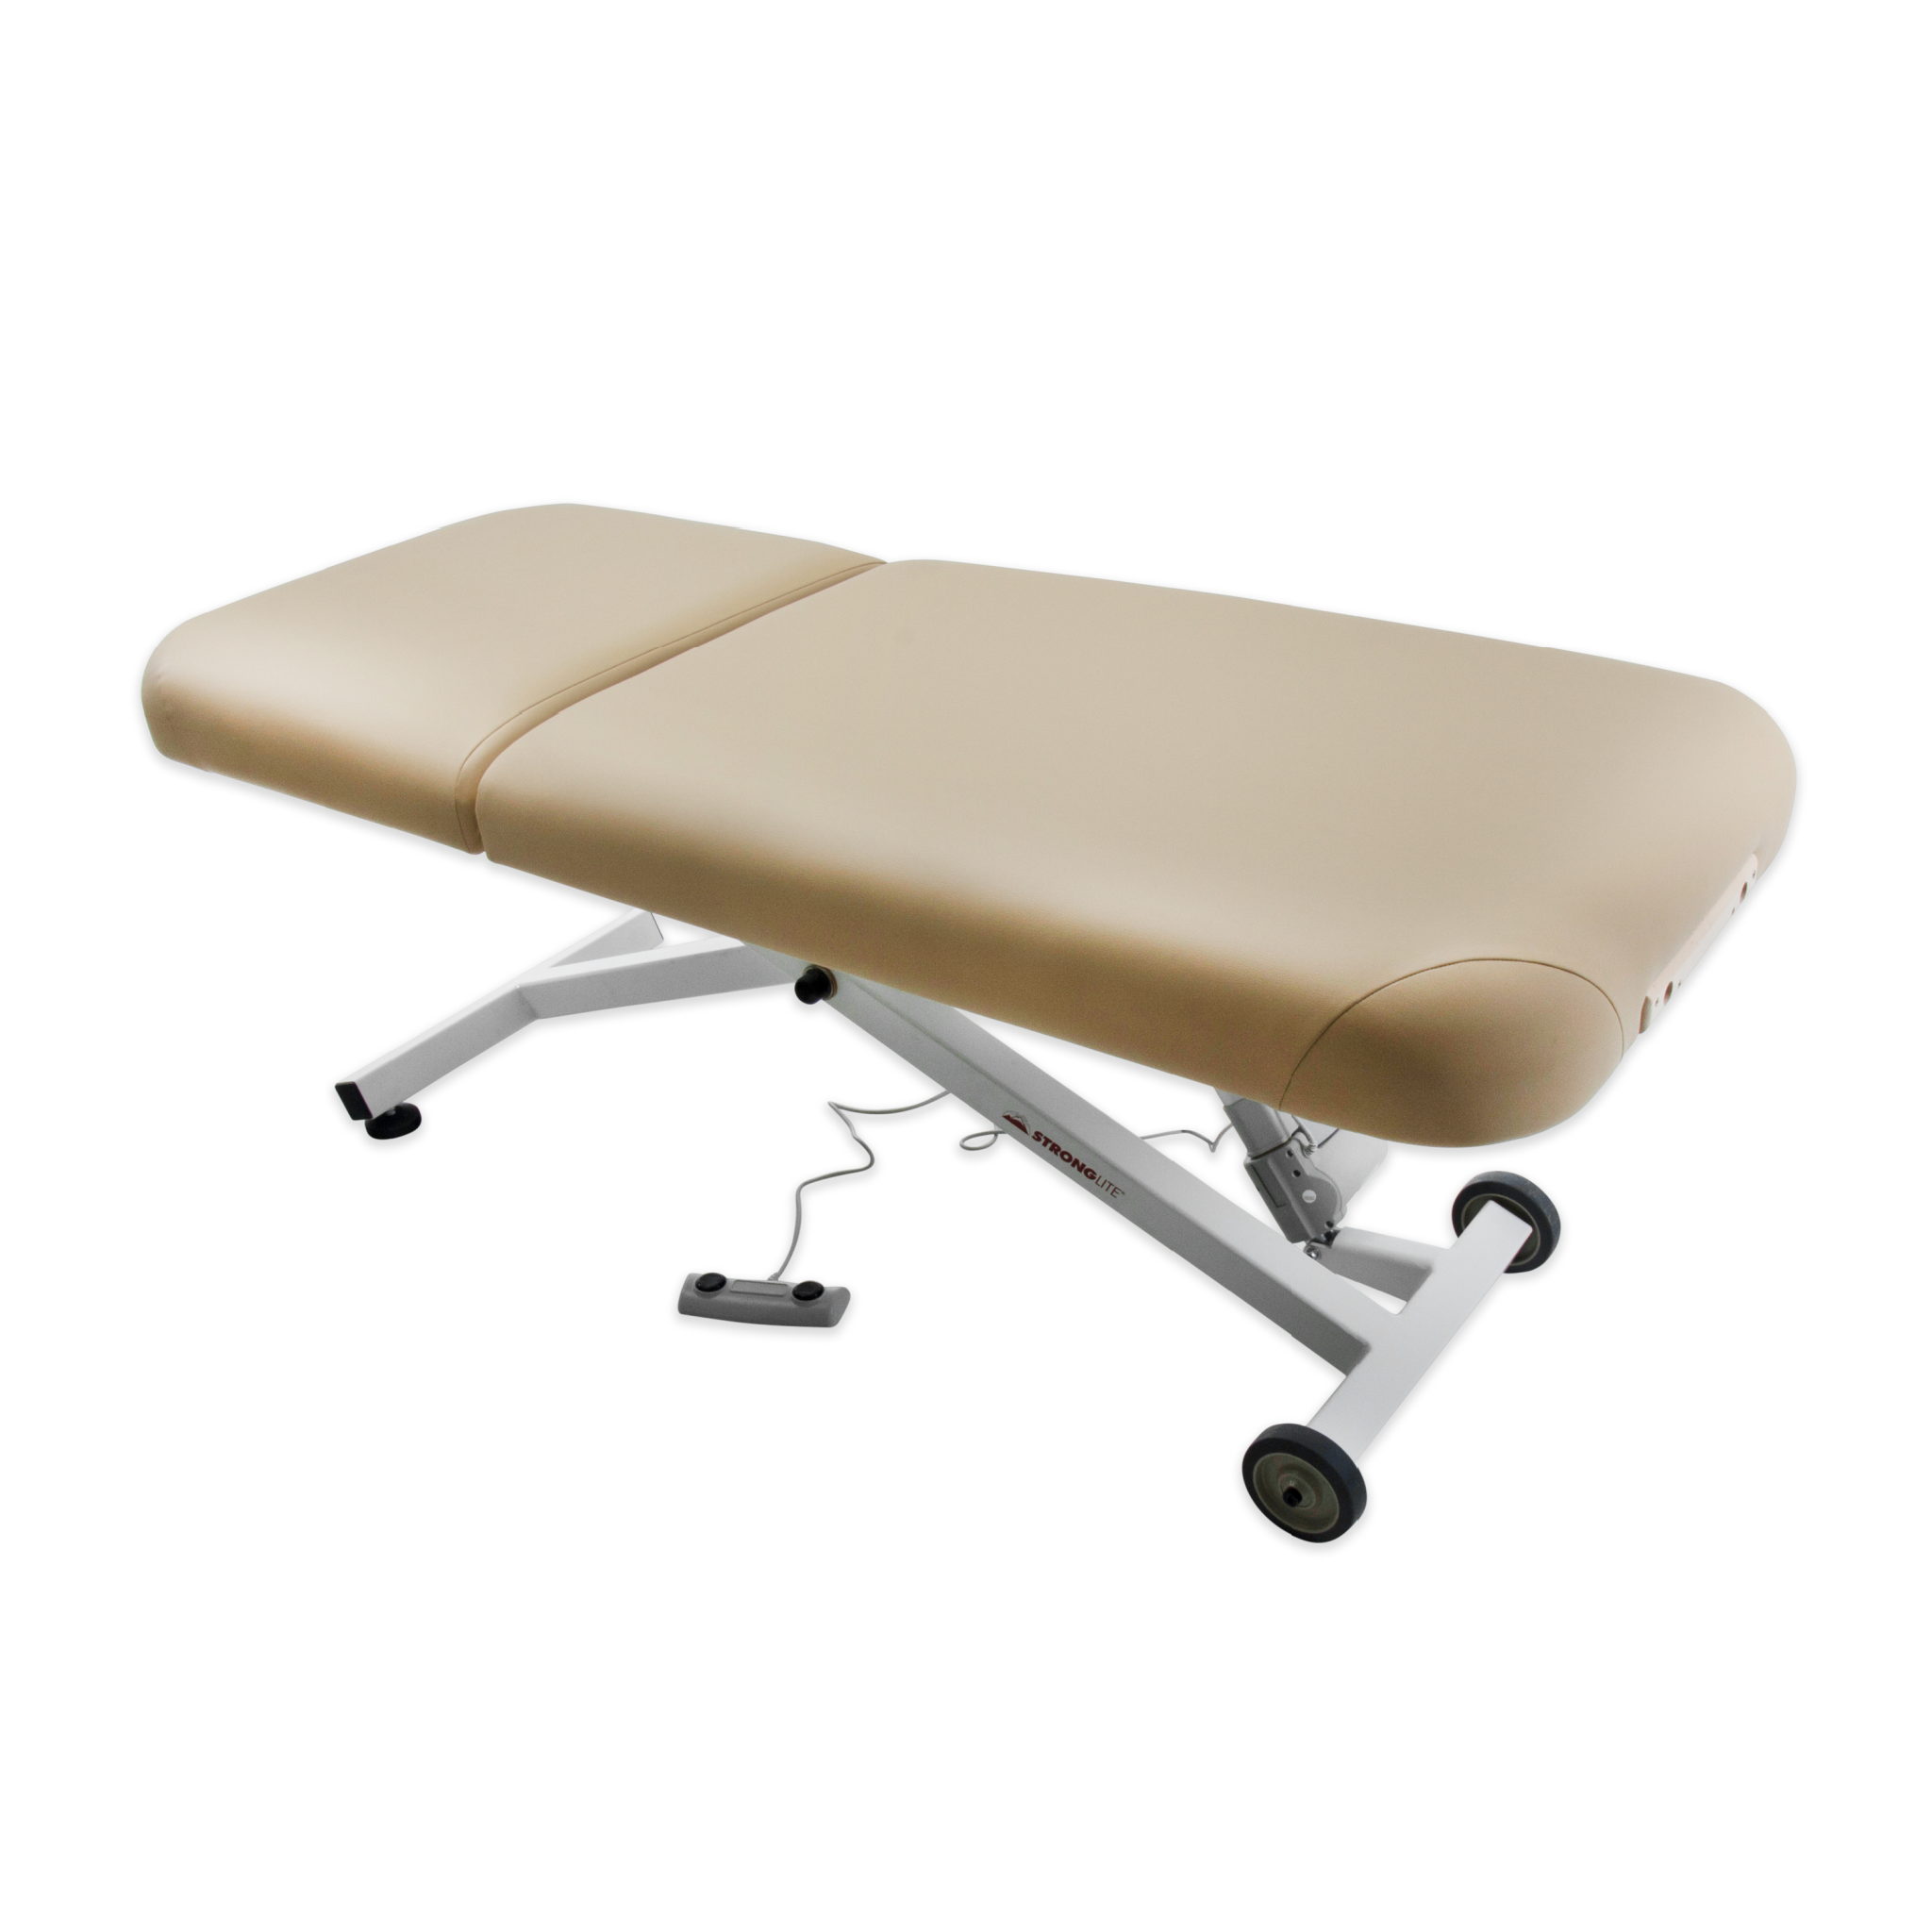 StrongLite Ergo Lift Clinic Table for Massage, Aesthetics, Physio, Acupuncture, Osteopathy